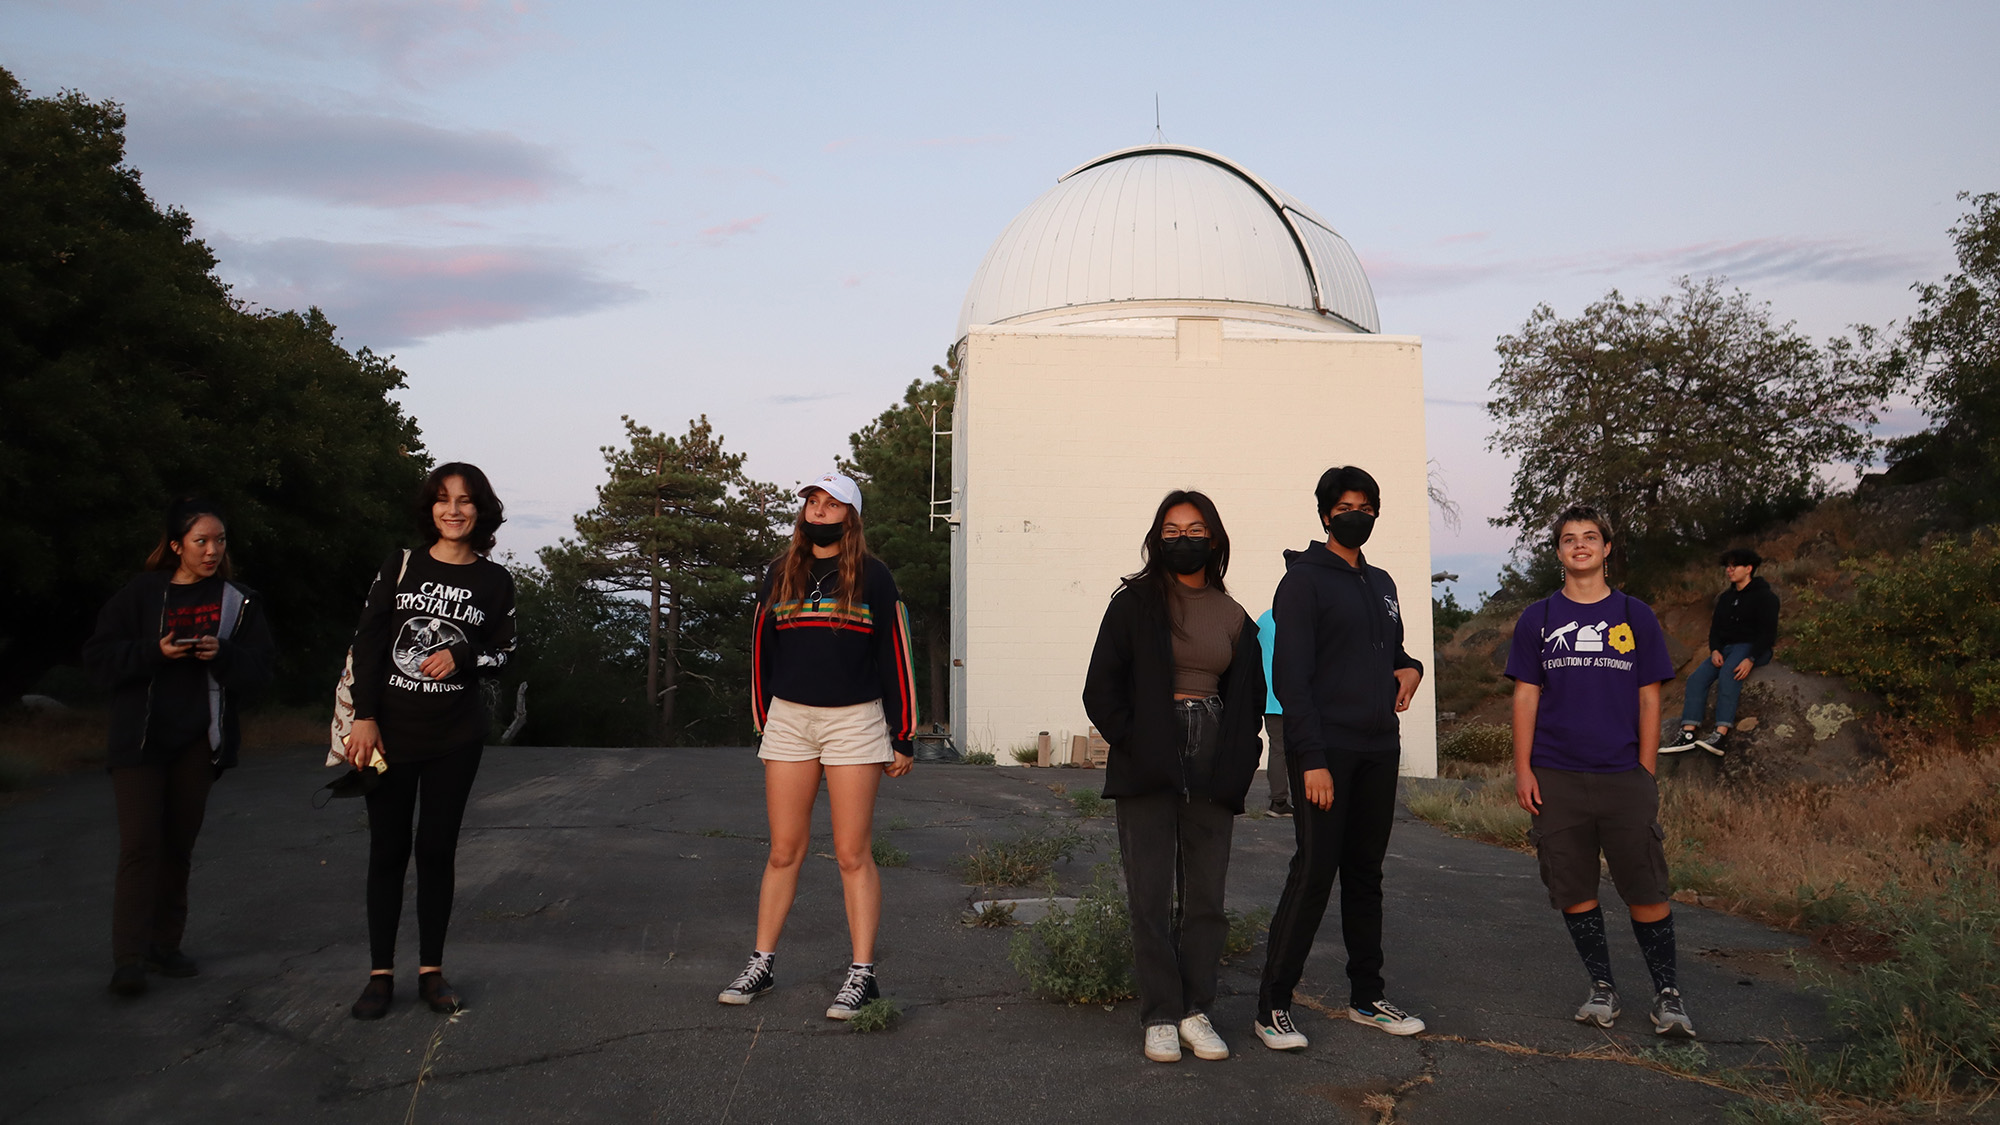 Students stand in front of observatory tower at dusk